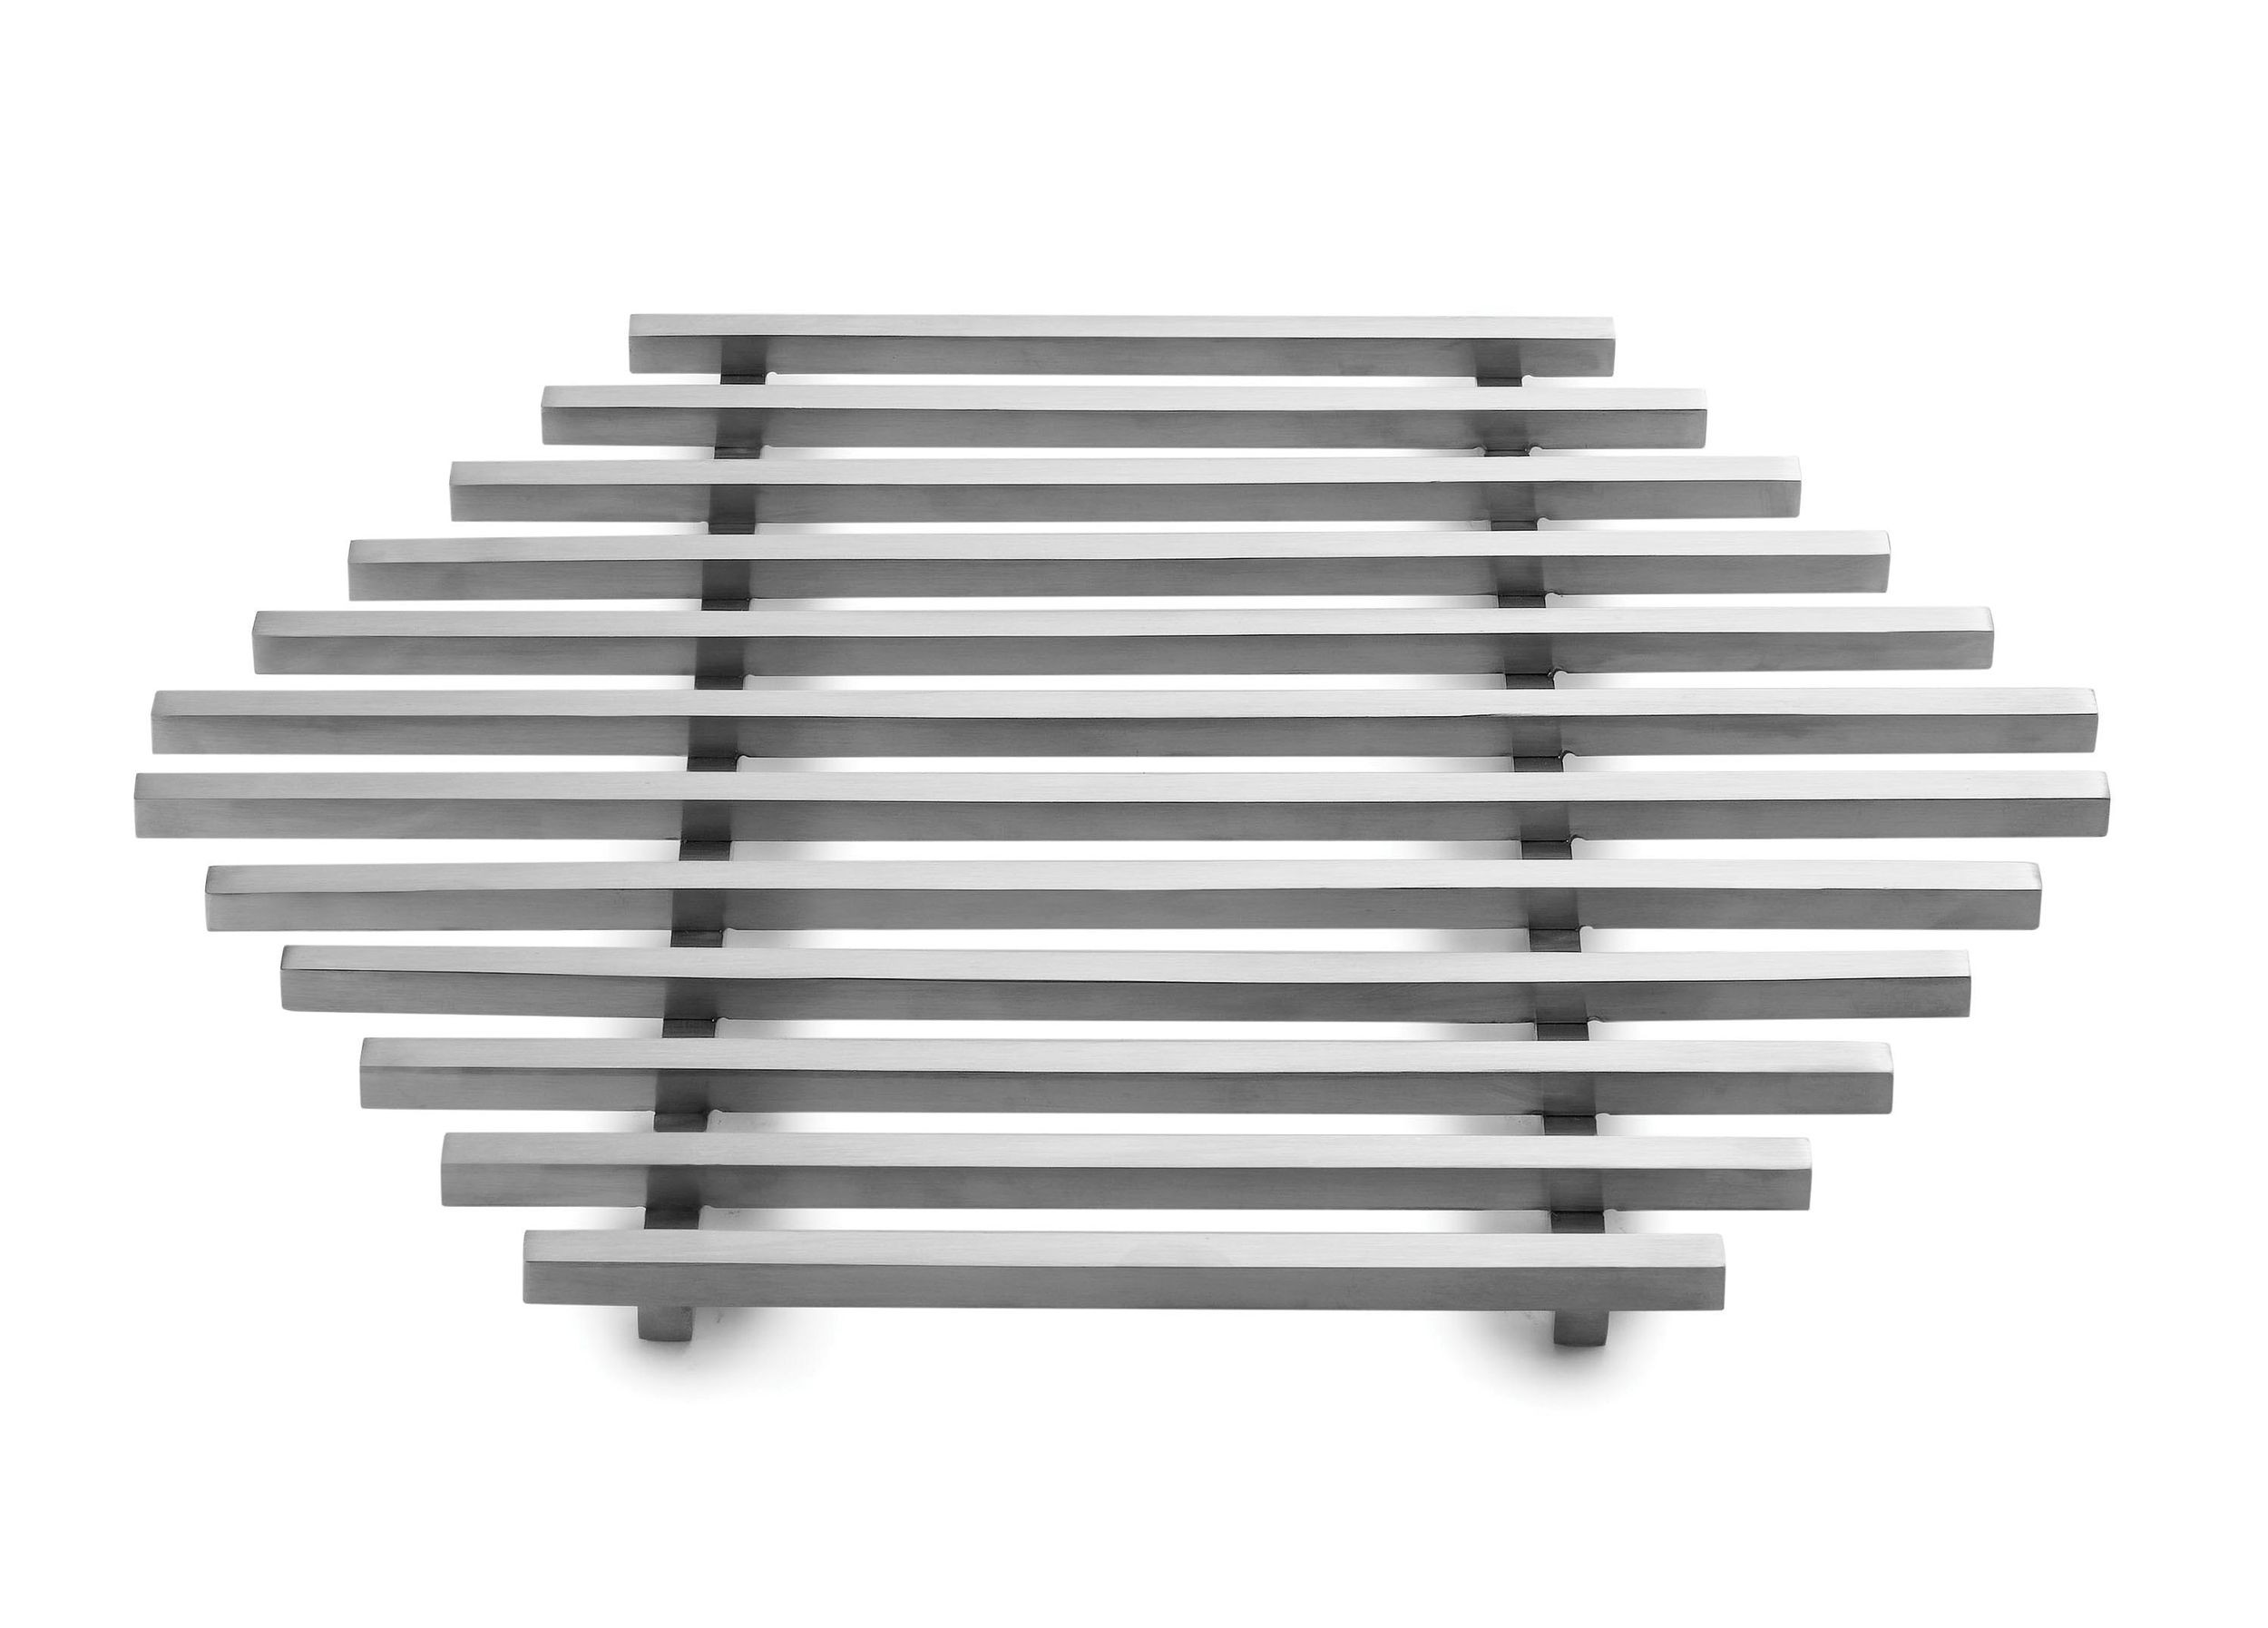 Rosseto SM223 Honeycomb™ Large Stainless Steel Track Grill 17.75" x 15.5" x 0.8"